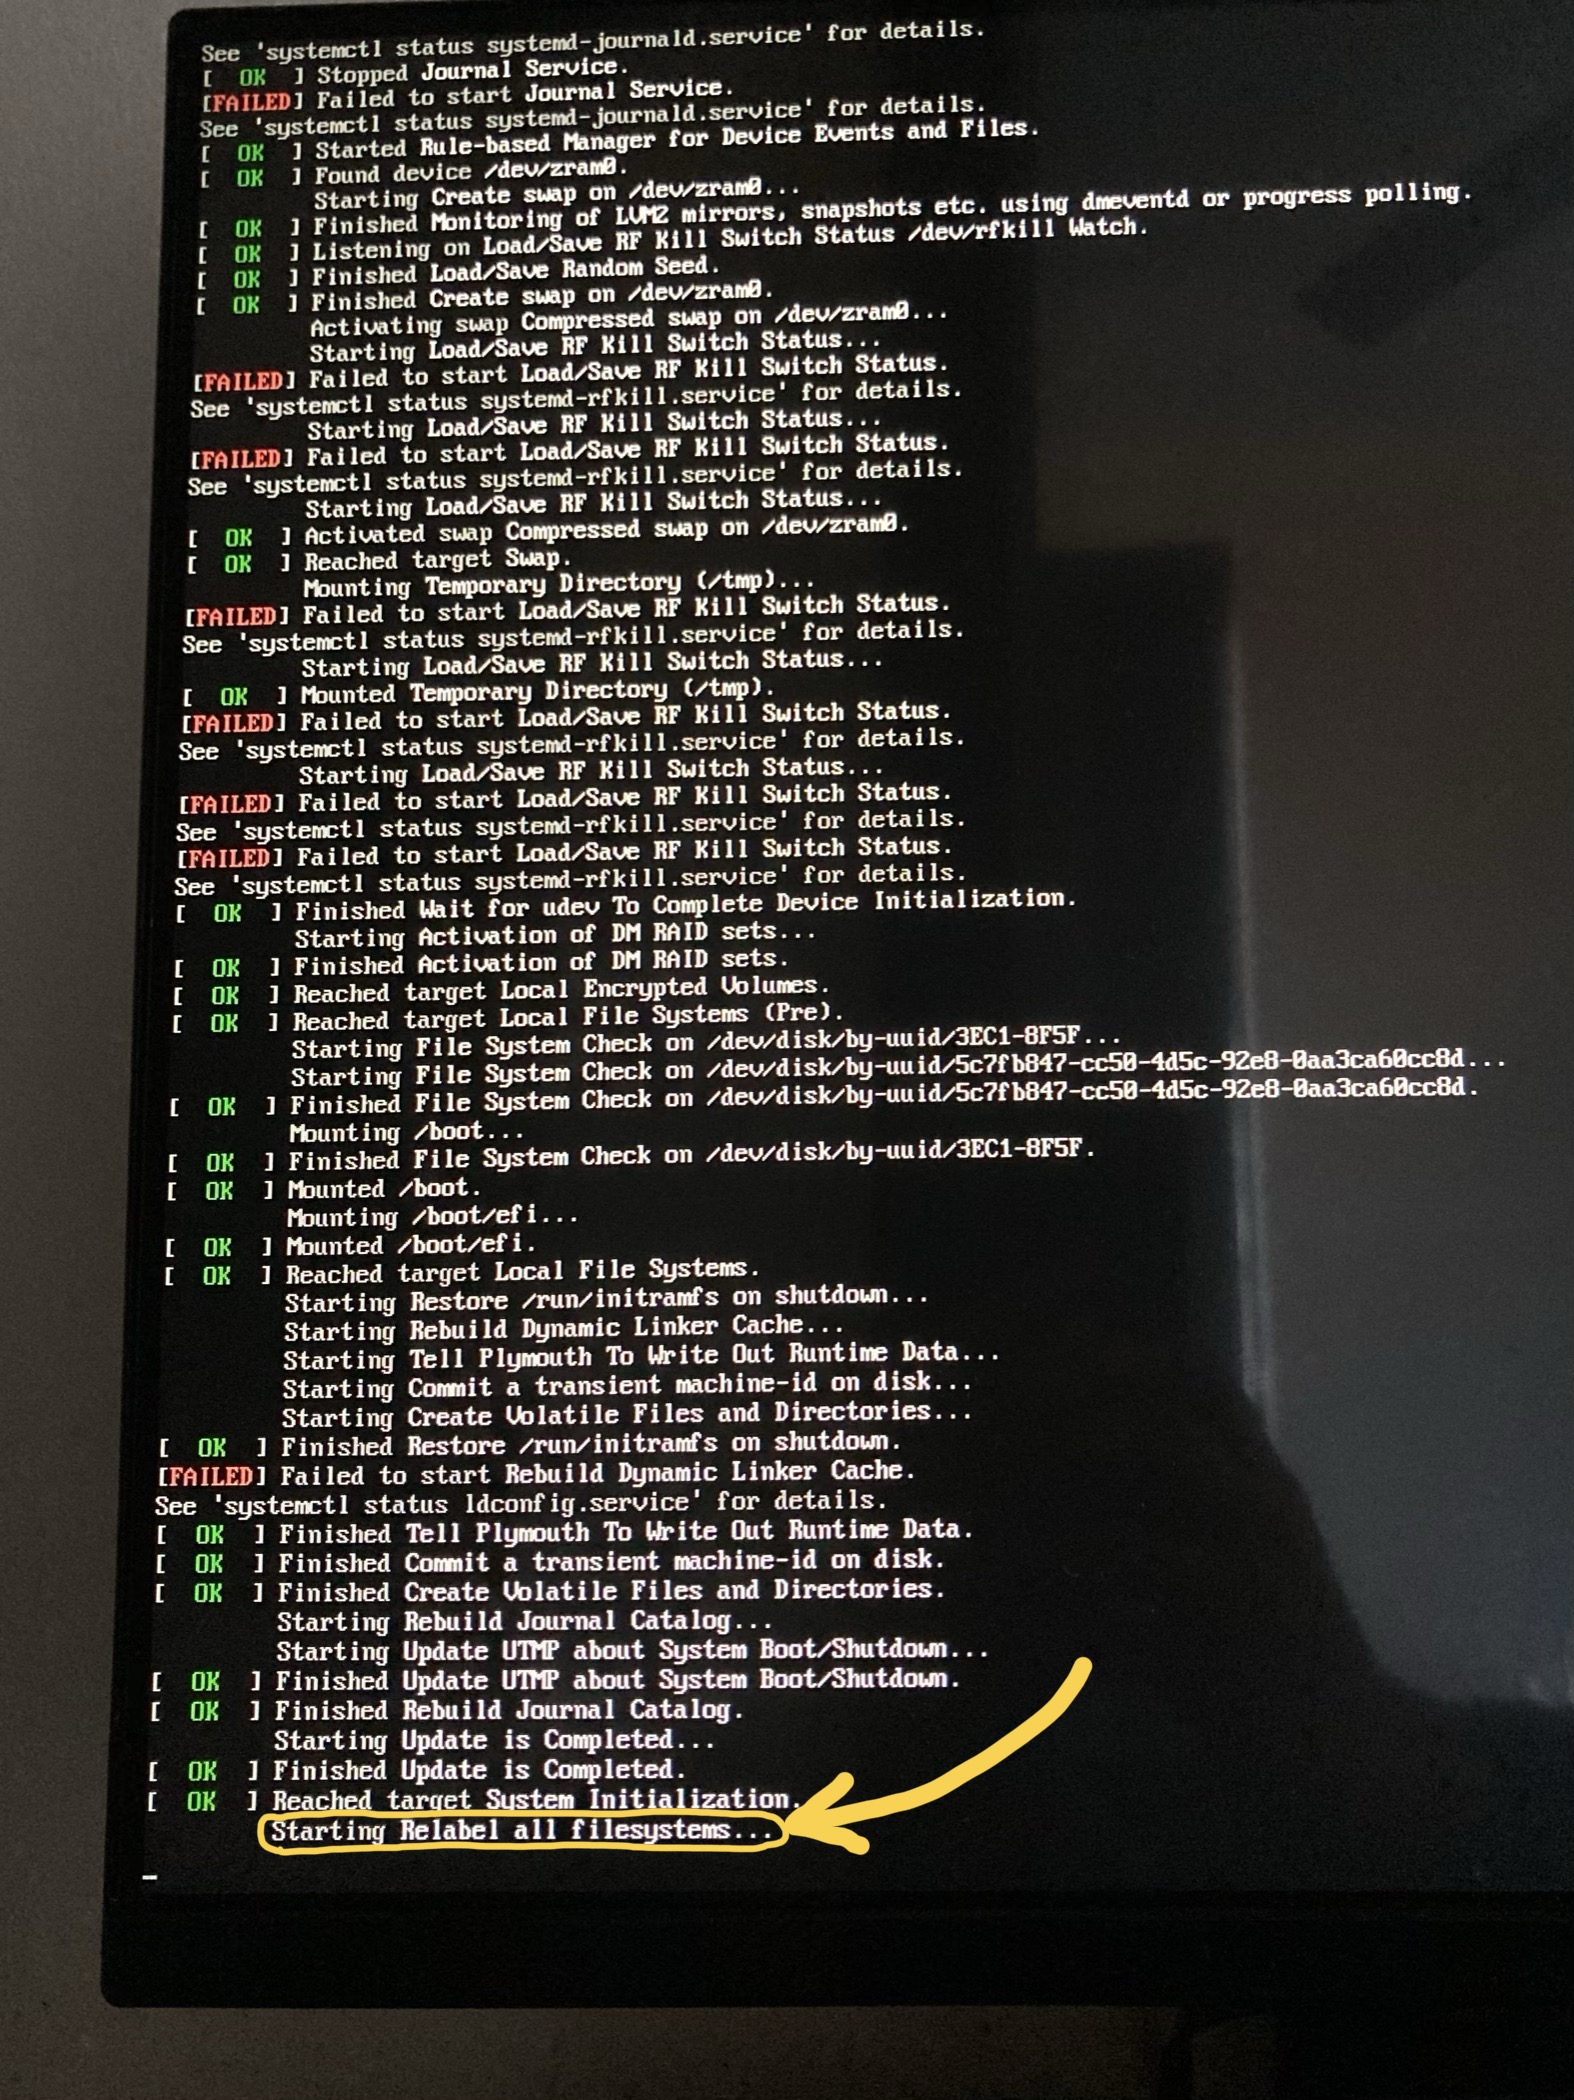 Boot message indicating file systems are being relabeled for\nSELinux